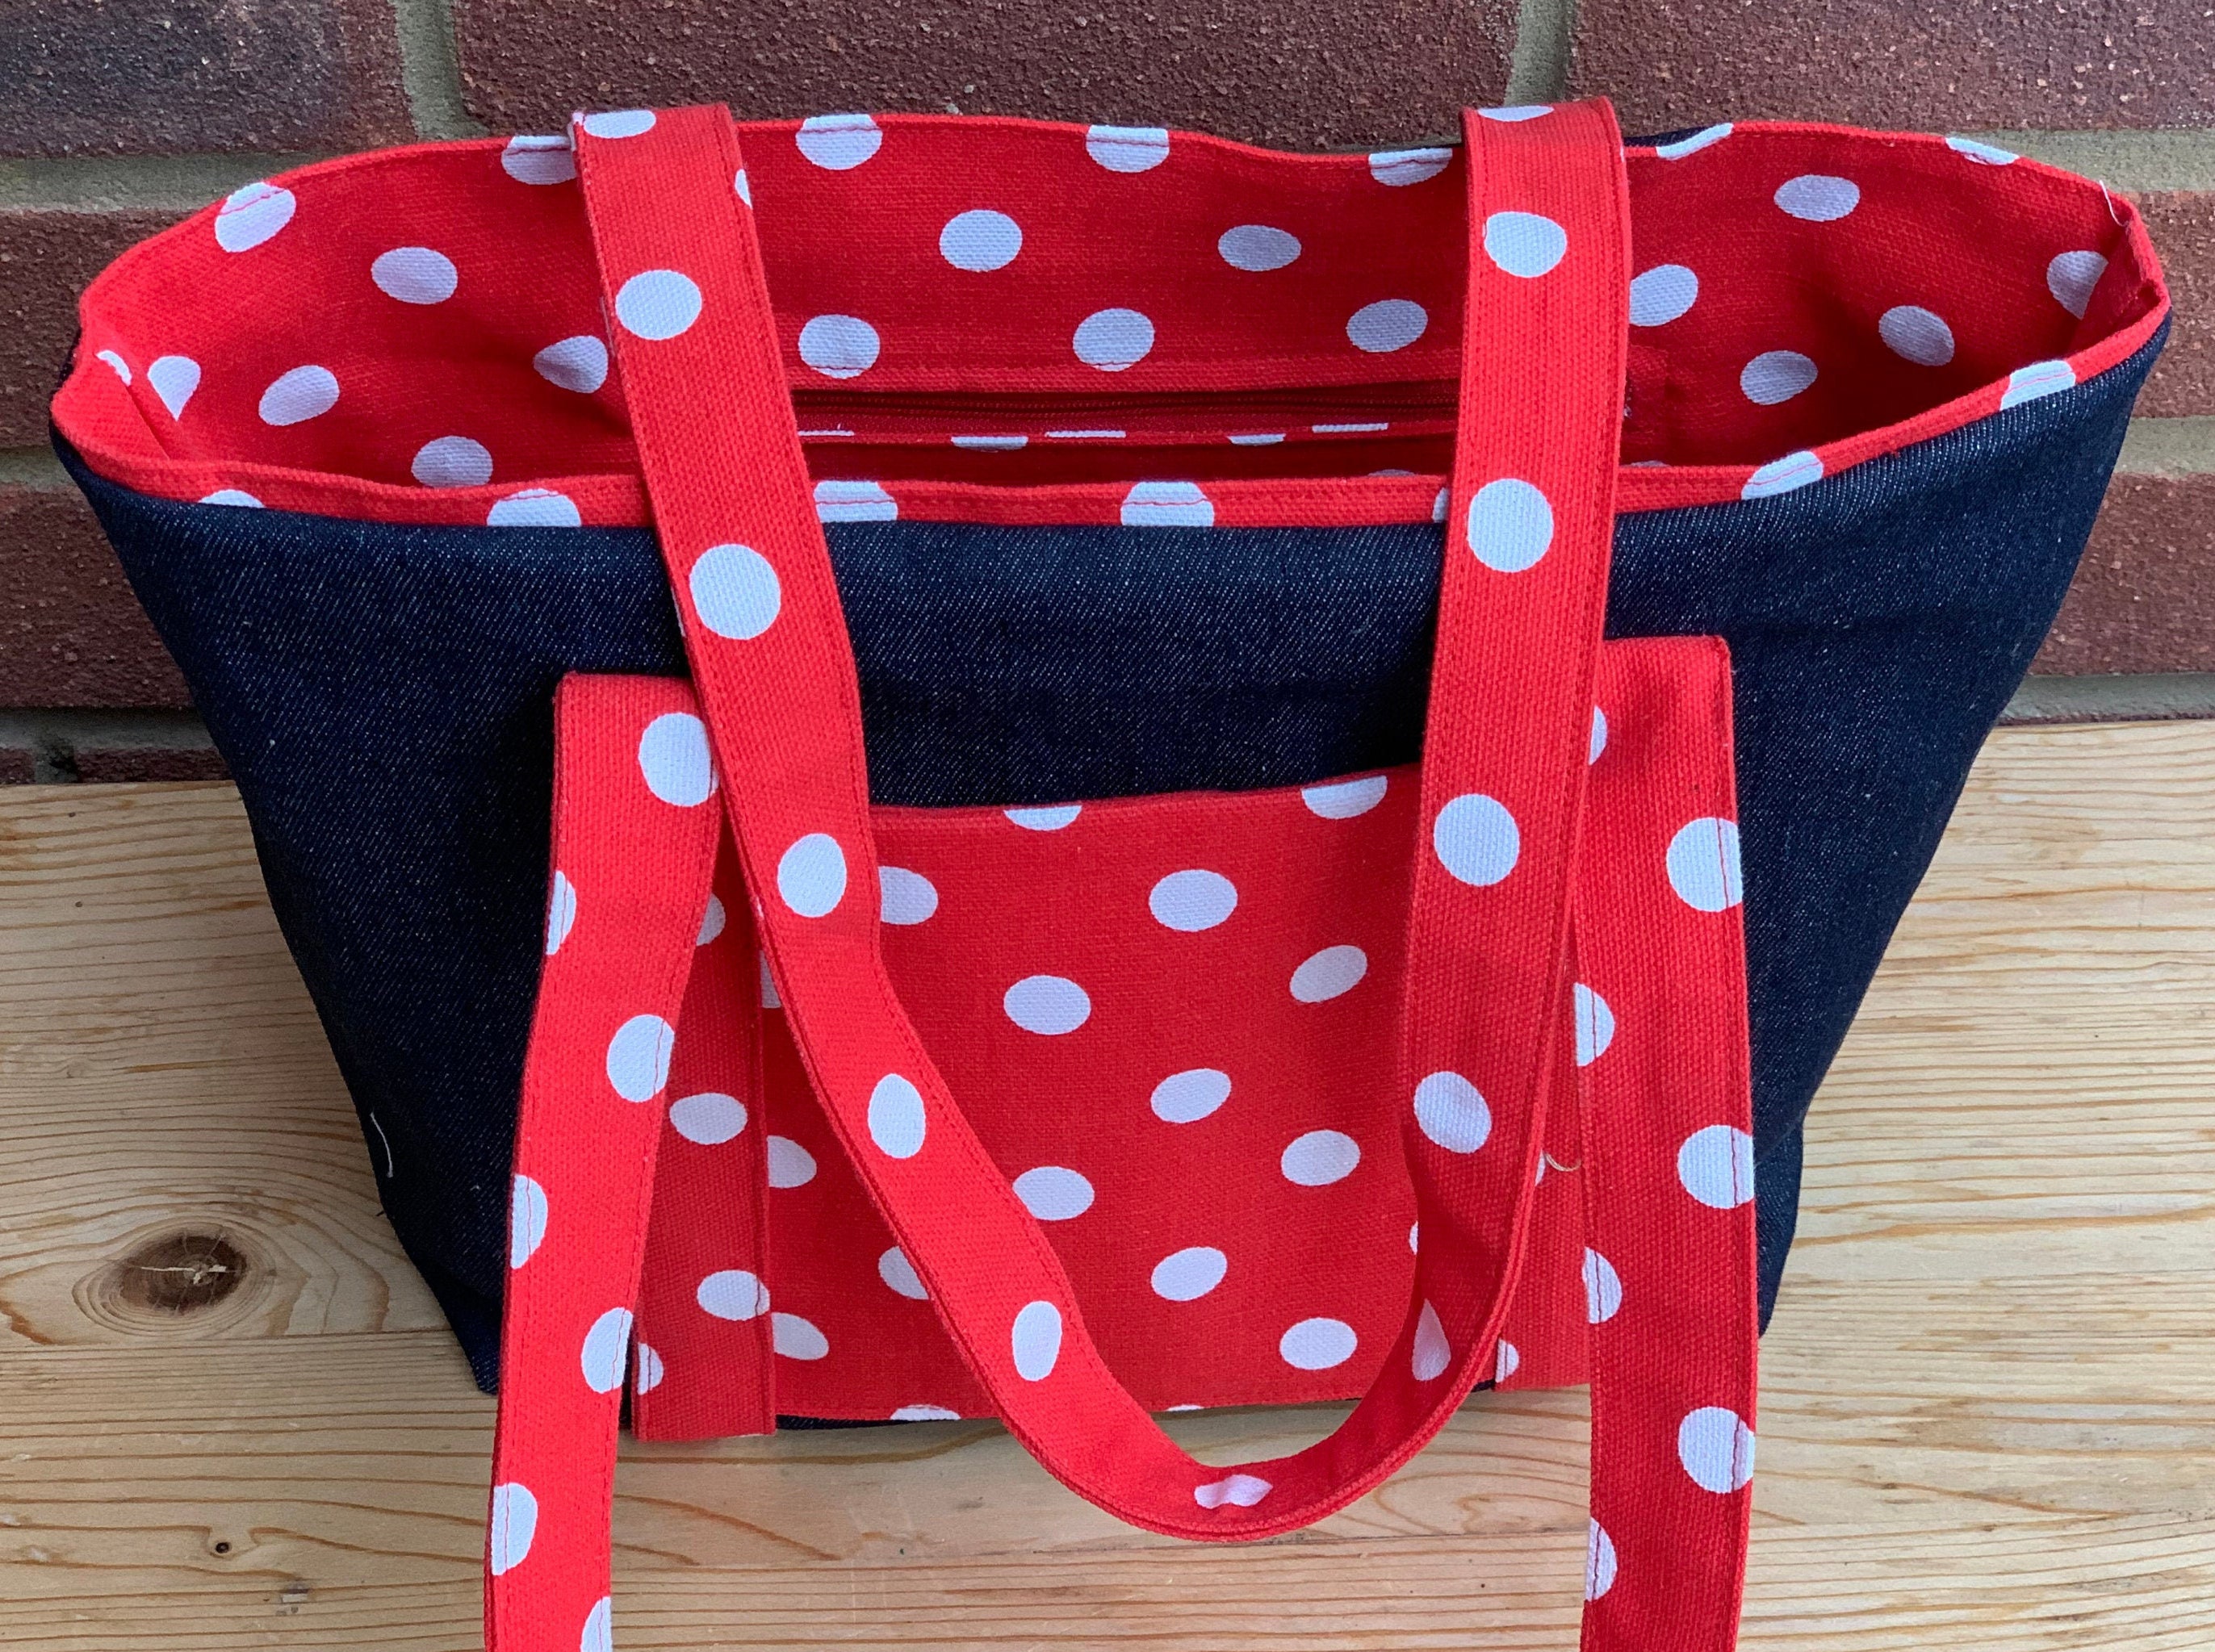 Everyday quality denim tote bag. Handmade with bright red and | Etsy